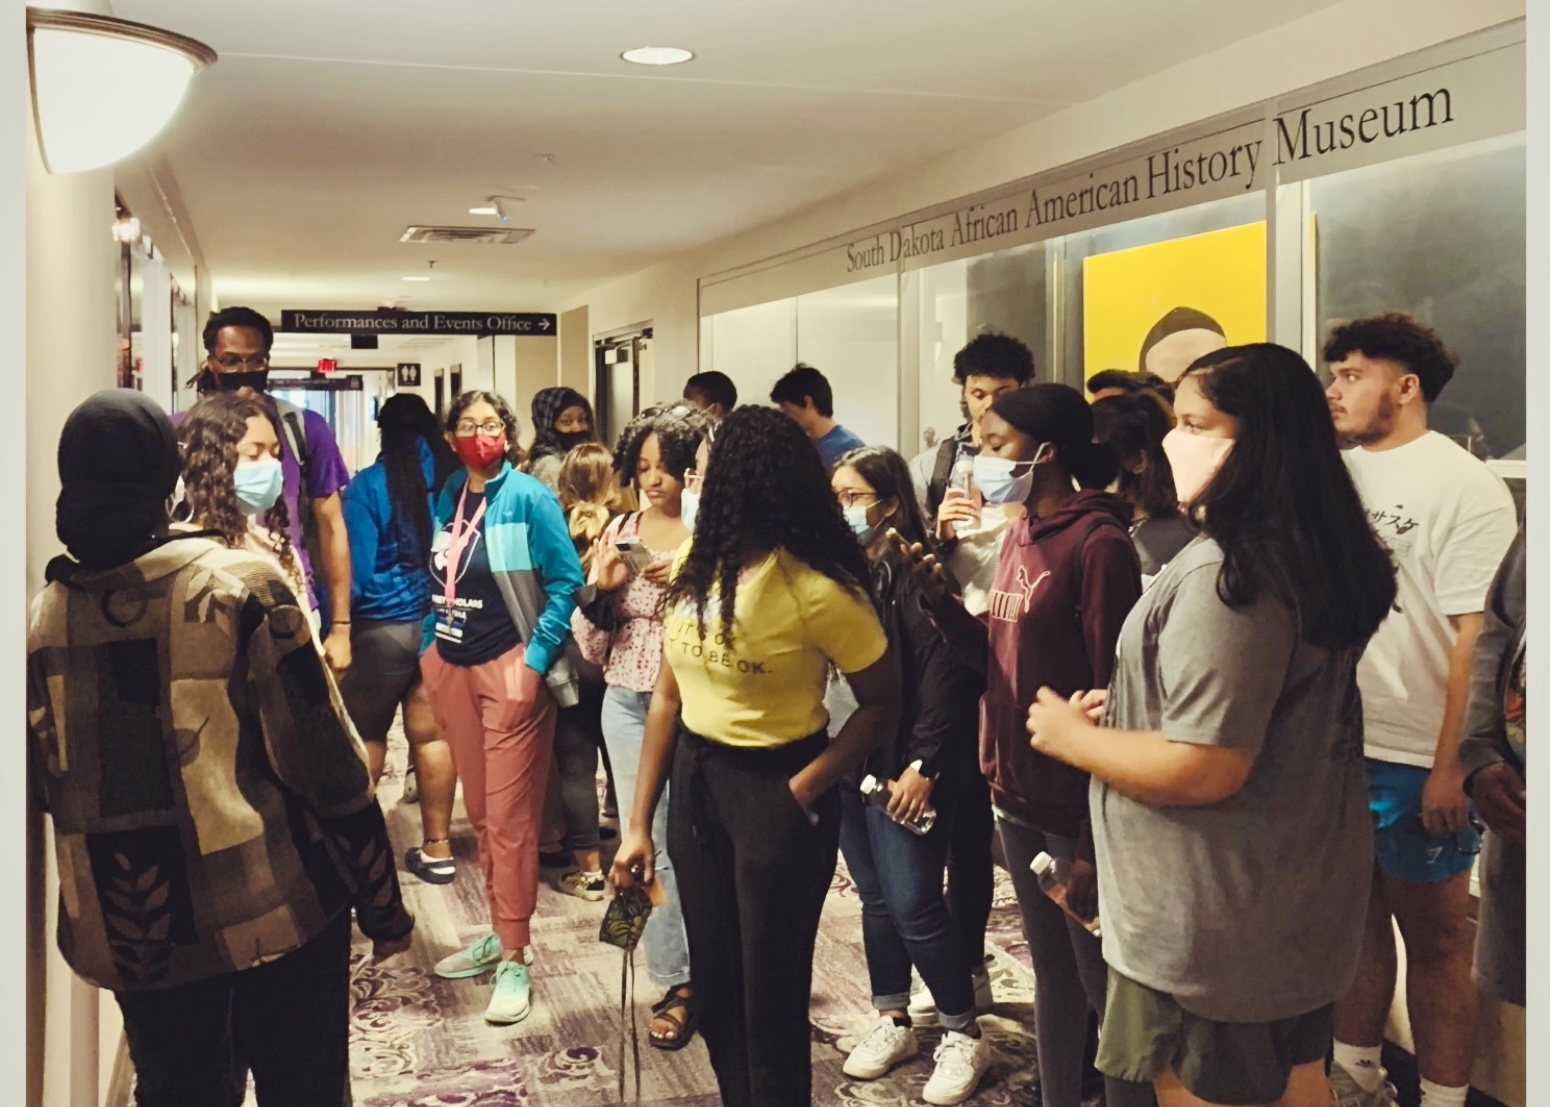 A group of about 20 young people stand in a hallway. On one side there is a glass display case with the words "South Dakota African American History Museum" above it.